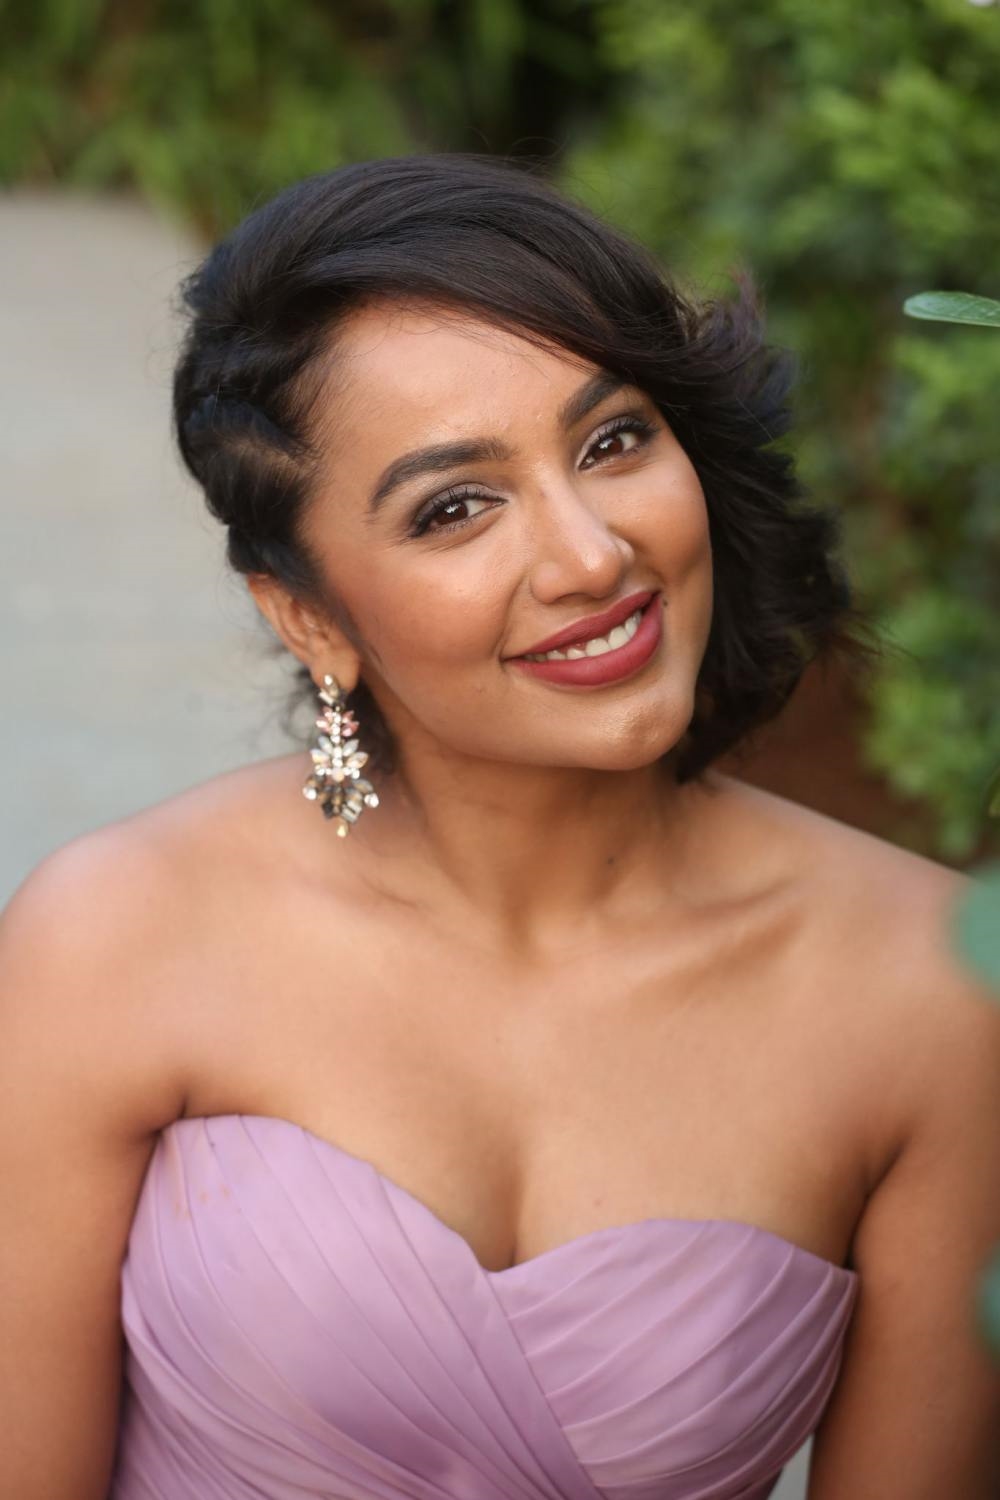 BiggBoss2 Contestant Tejaswi Madivada Hot Sizzling Images In Pink Dress